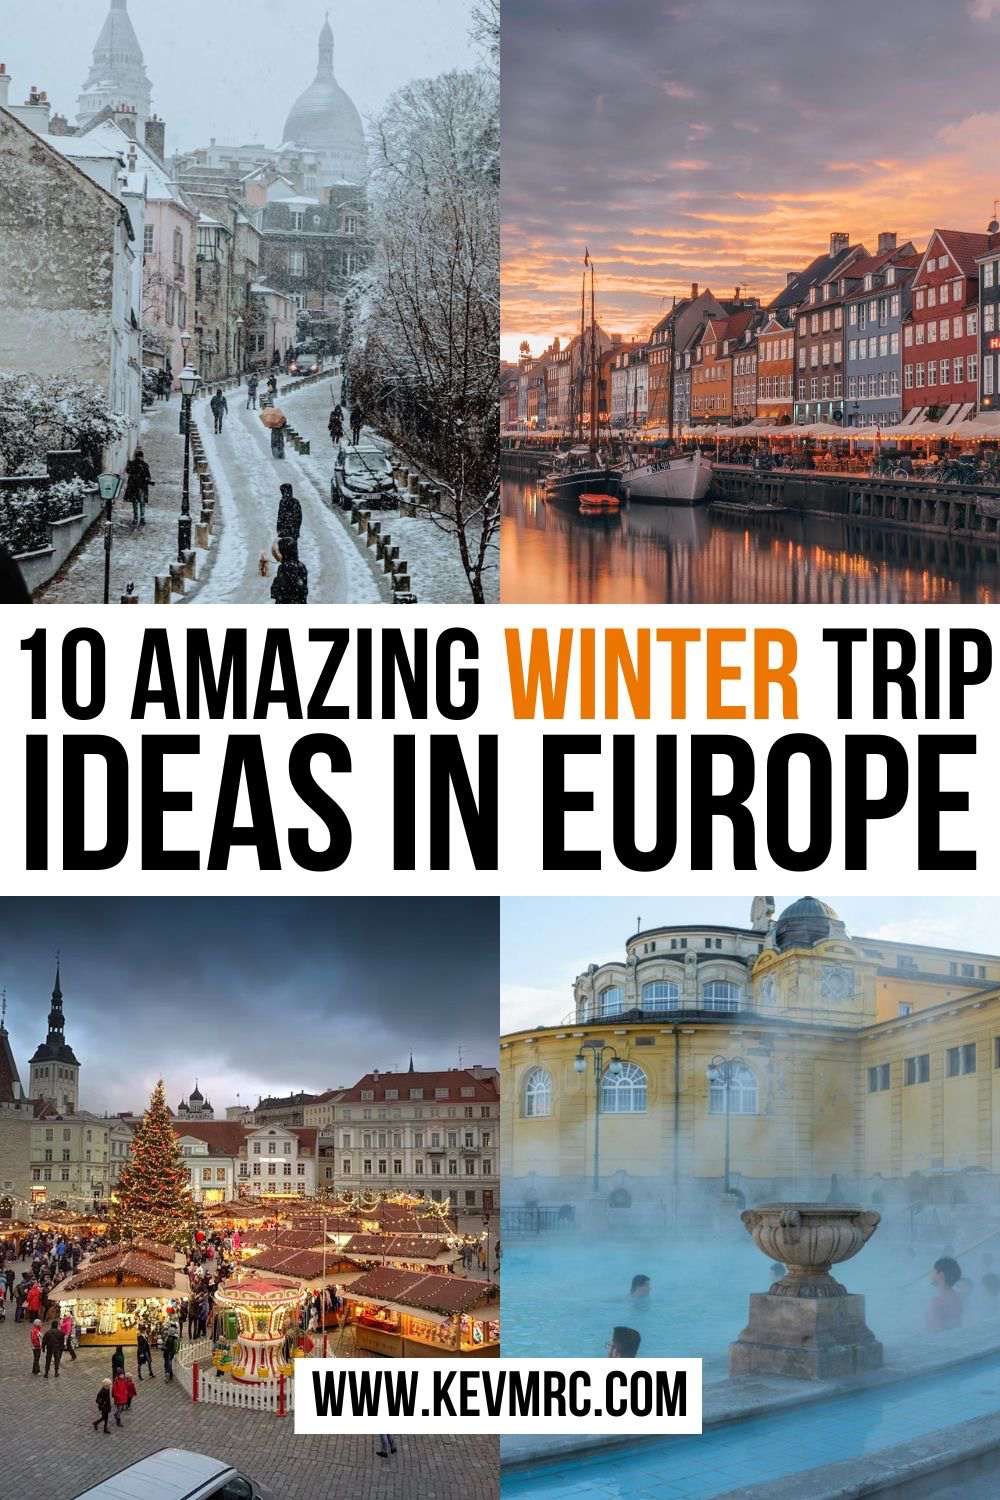 Don't know where to go in Europe in winter? Here are my 10 favorite places to visit in Europe in winter, with weather info and more. best places to visit in europe in winter | best places in europe in winter | europe winter travel destinations | winter trip ideas | best winter trips in europe